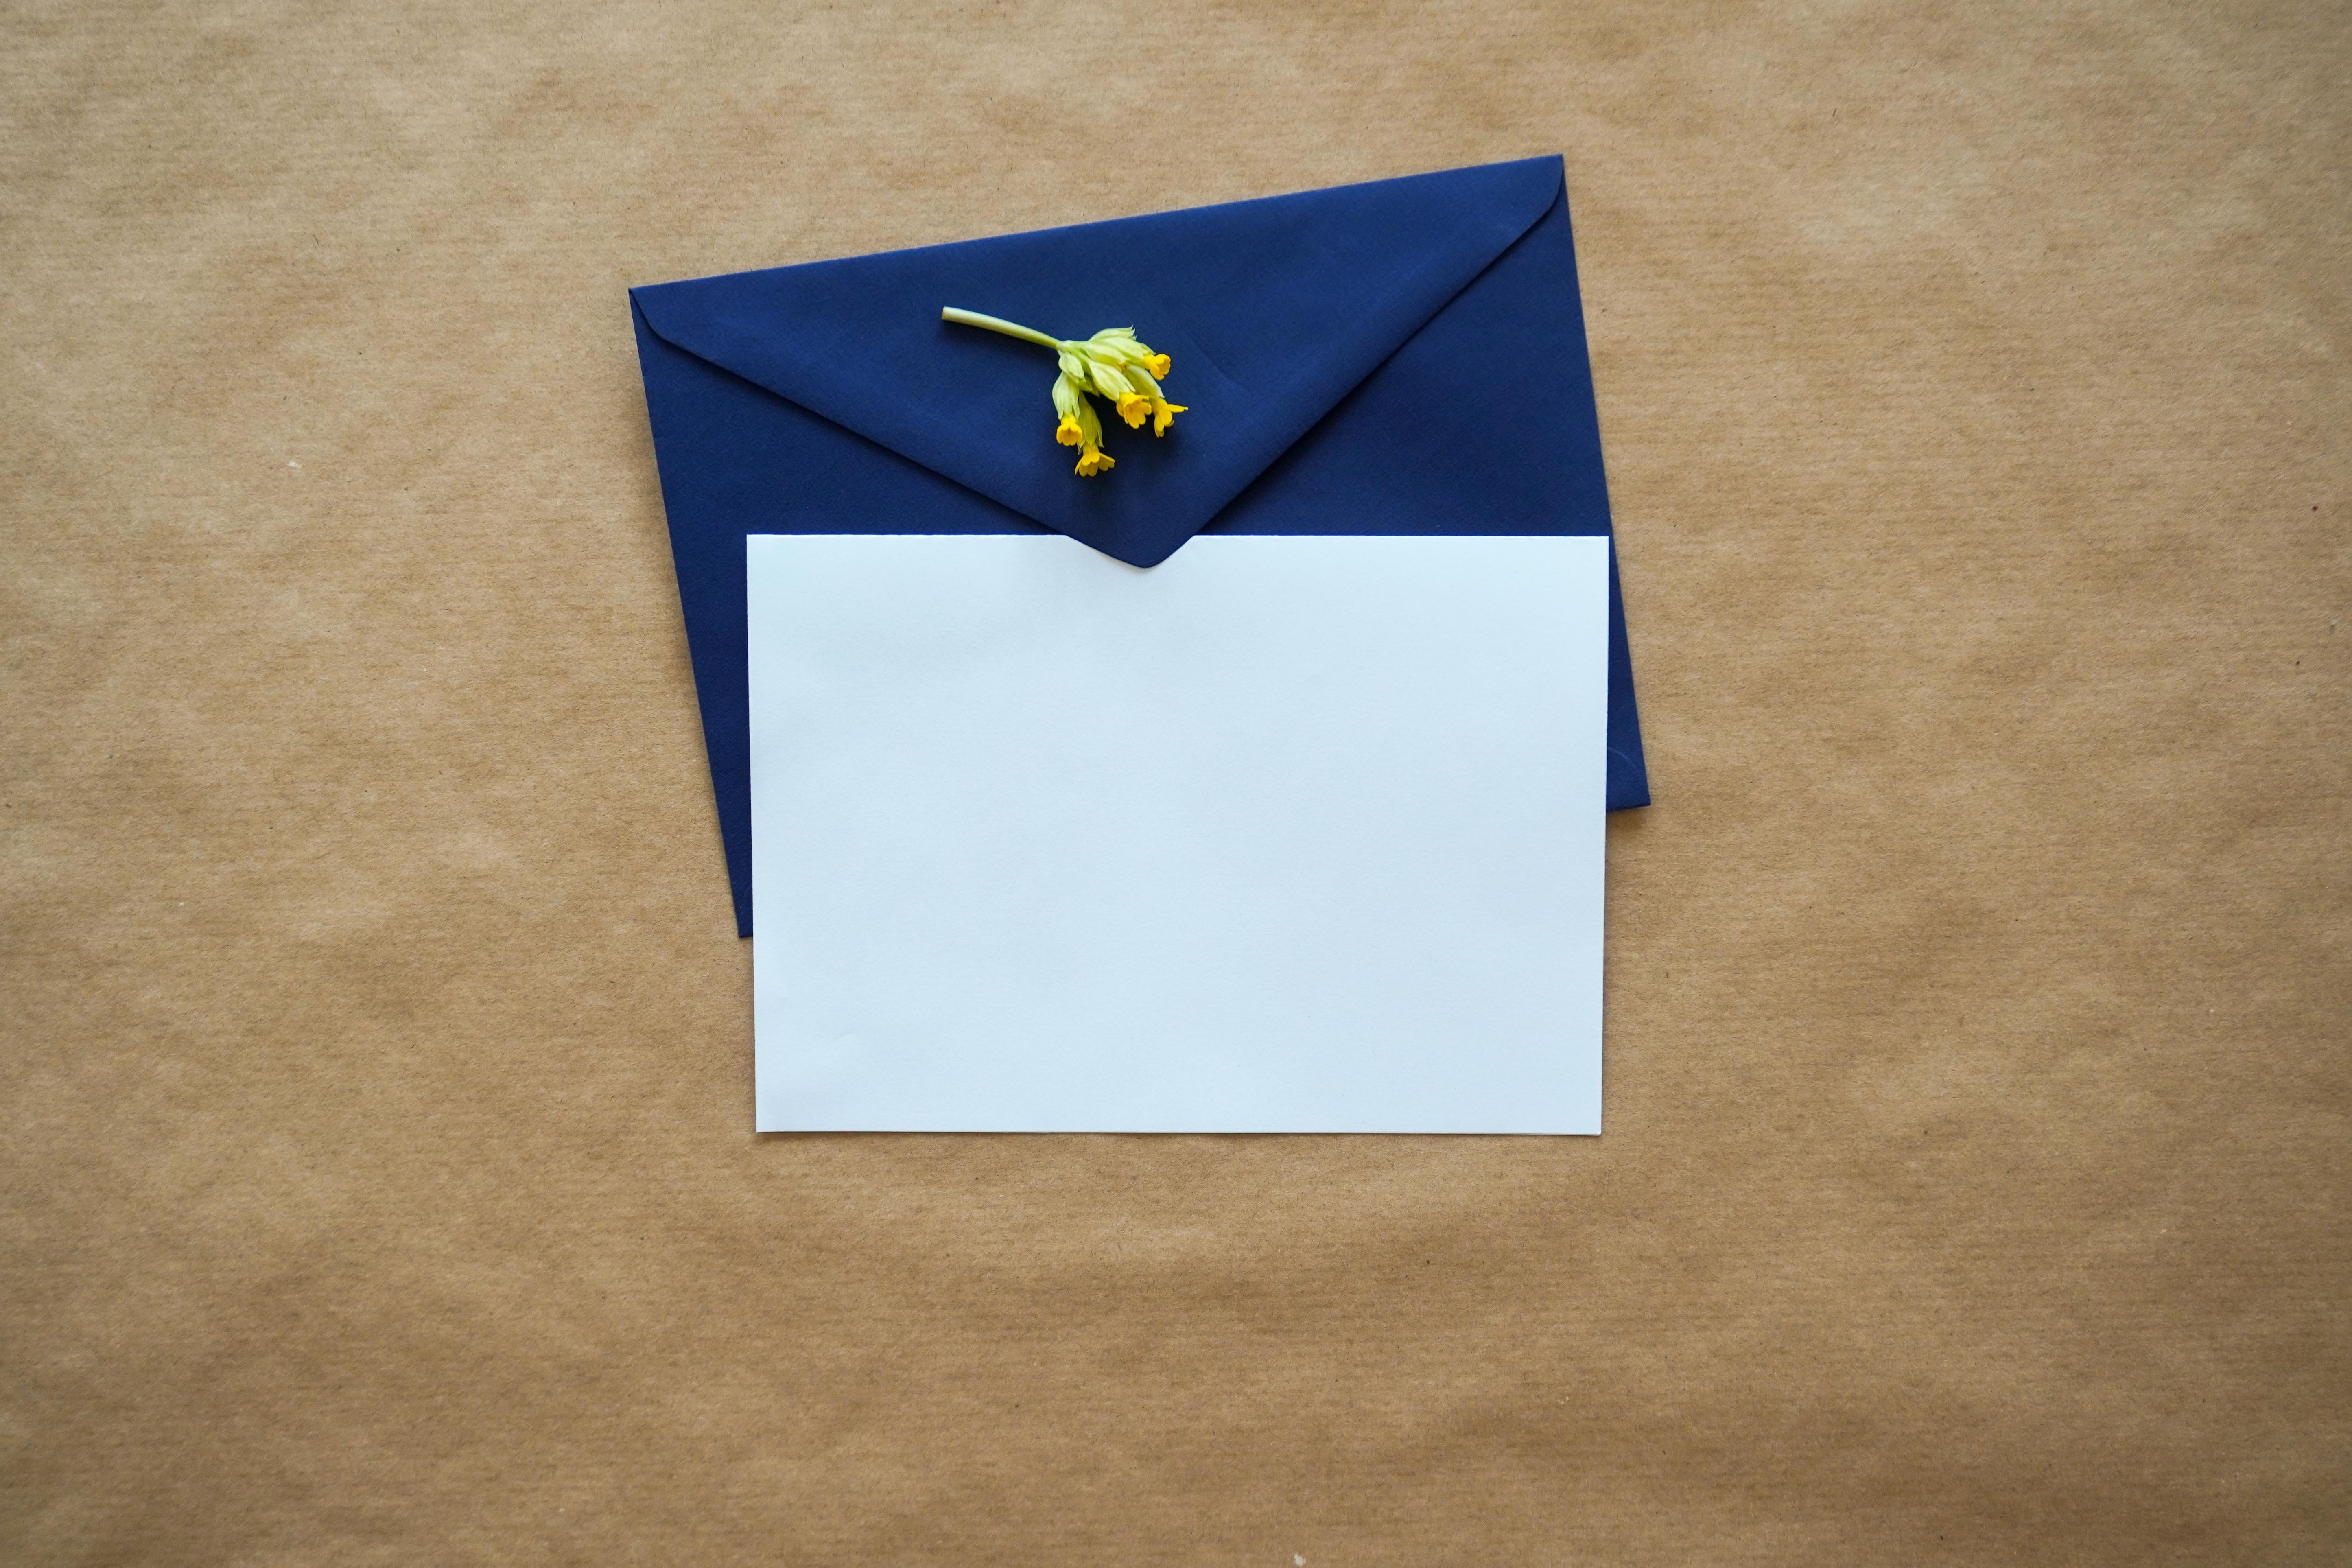 Kate wrote a letter to Jade | Photo: Unsplash